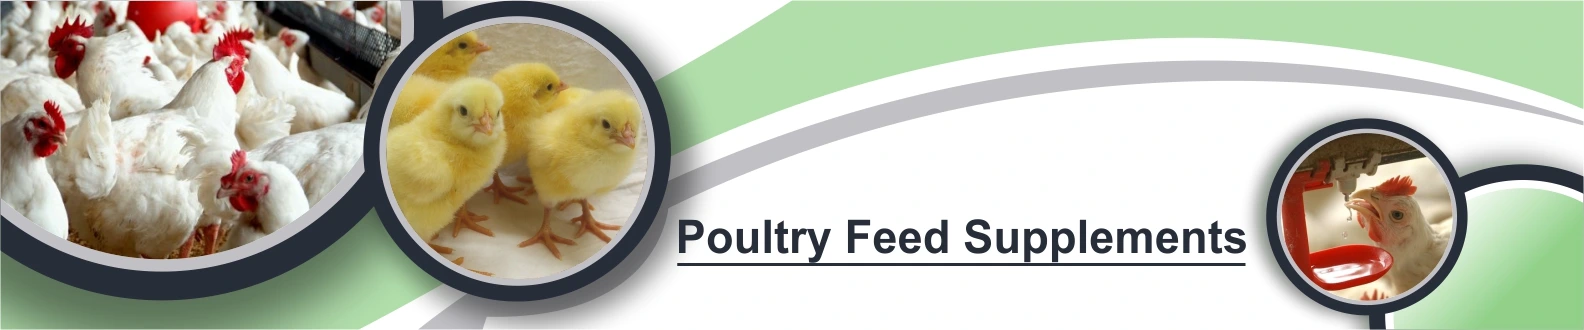 poultry-banner-image